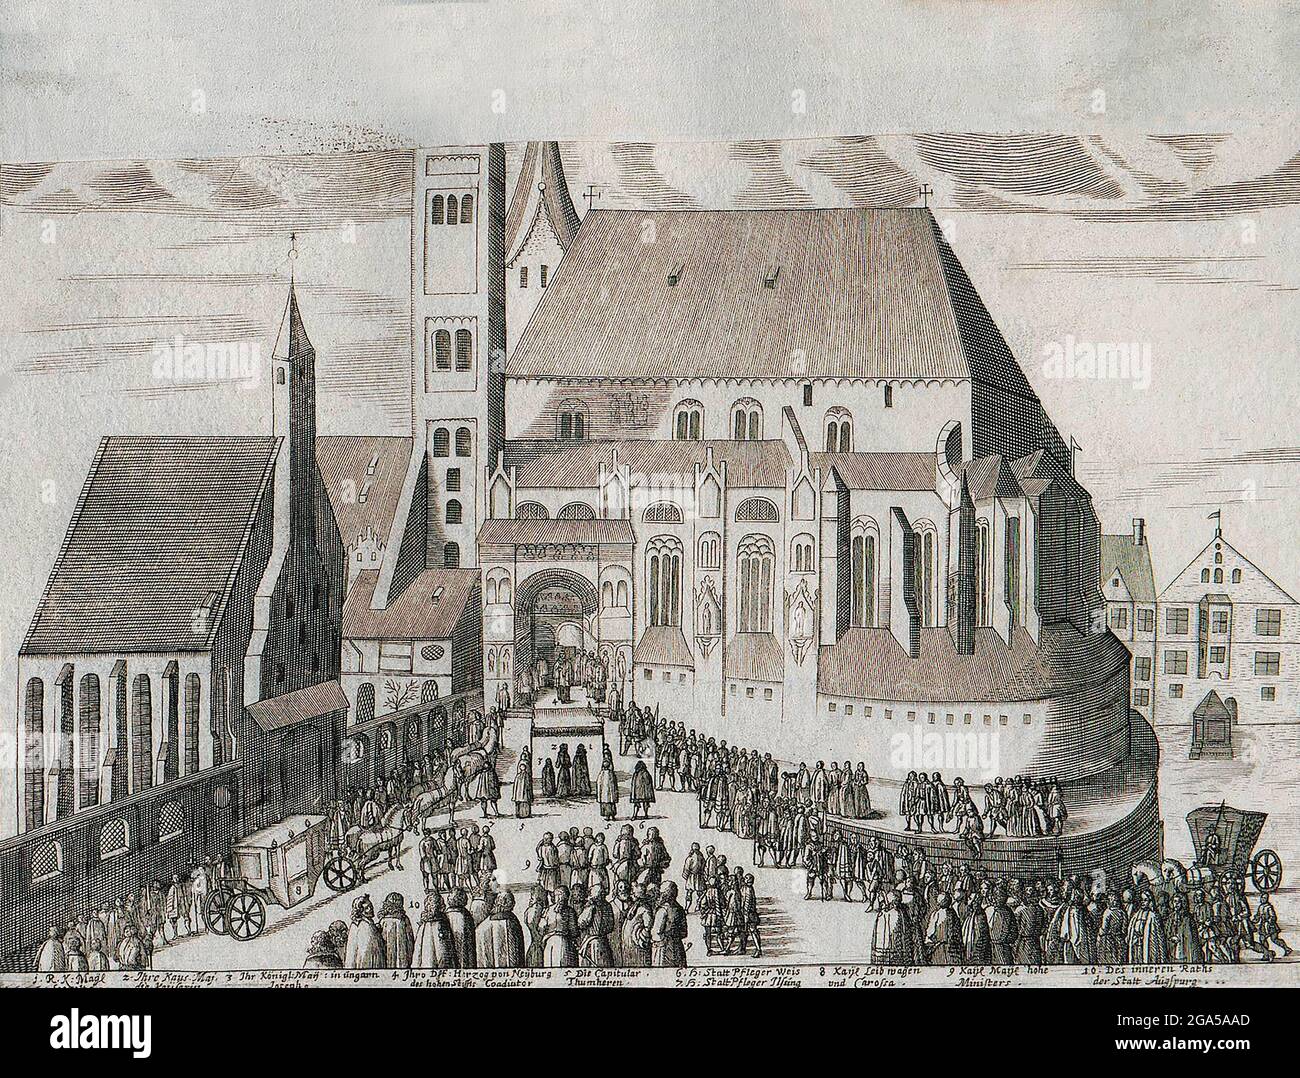 Germany: 'Entry of Emperor Leopold I, his Wife Eleonore Magdalene and King Joseph I to the Augsburg Cathedral', copper engraving, c. 1689. Leopold I (1640-1705) was the second son of Emperor Ferdinand III, and became heir apparent after the death of his older brother, Ferdinand IV. He was elected Holy Roman Emperor in 1658 after his father's death, and by then had also already become Archduke of Austria and claimed the crowns of Germany, Croatia, Bohemia and Hungary. Stock Photo